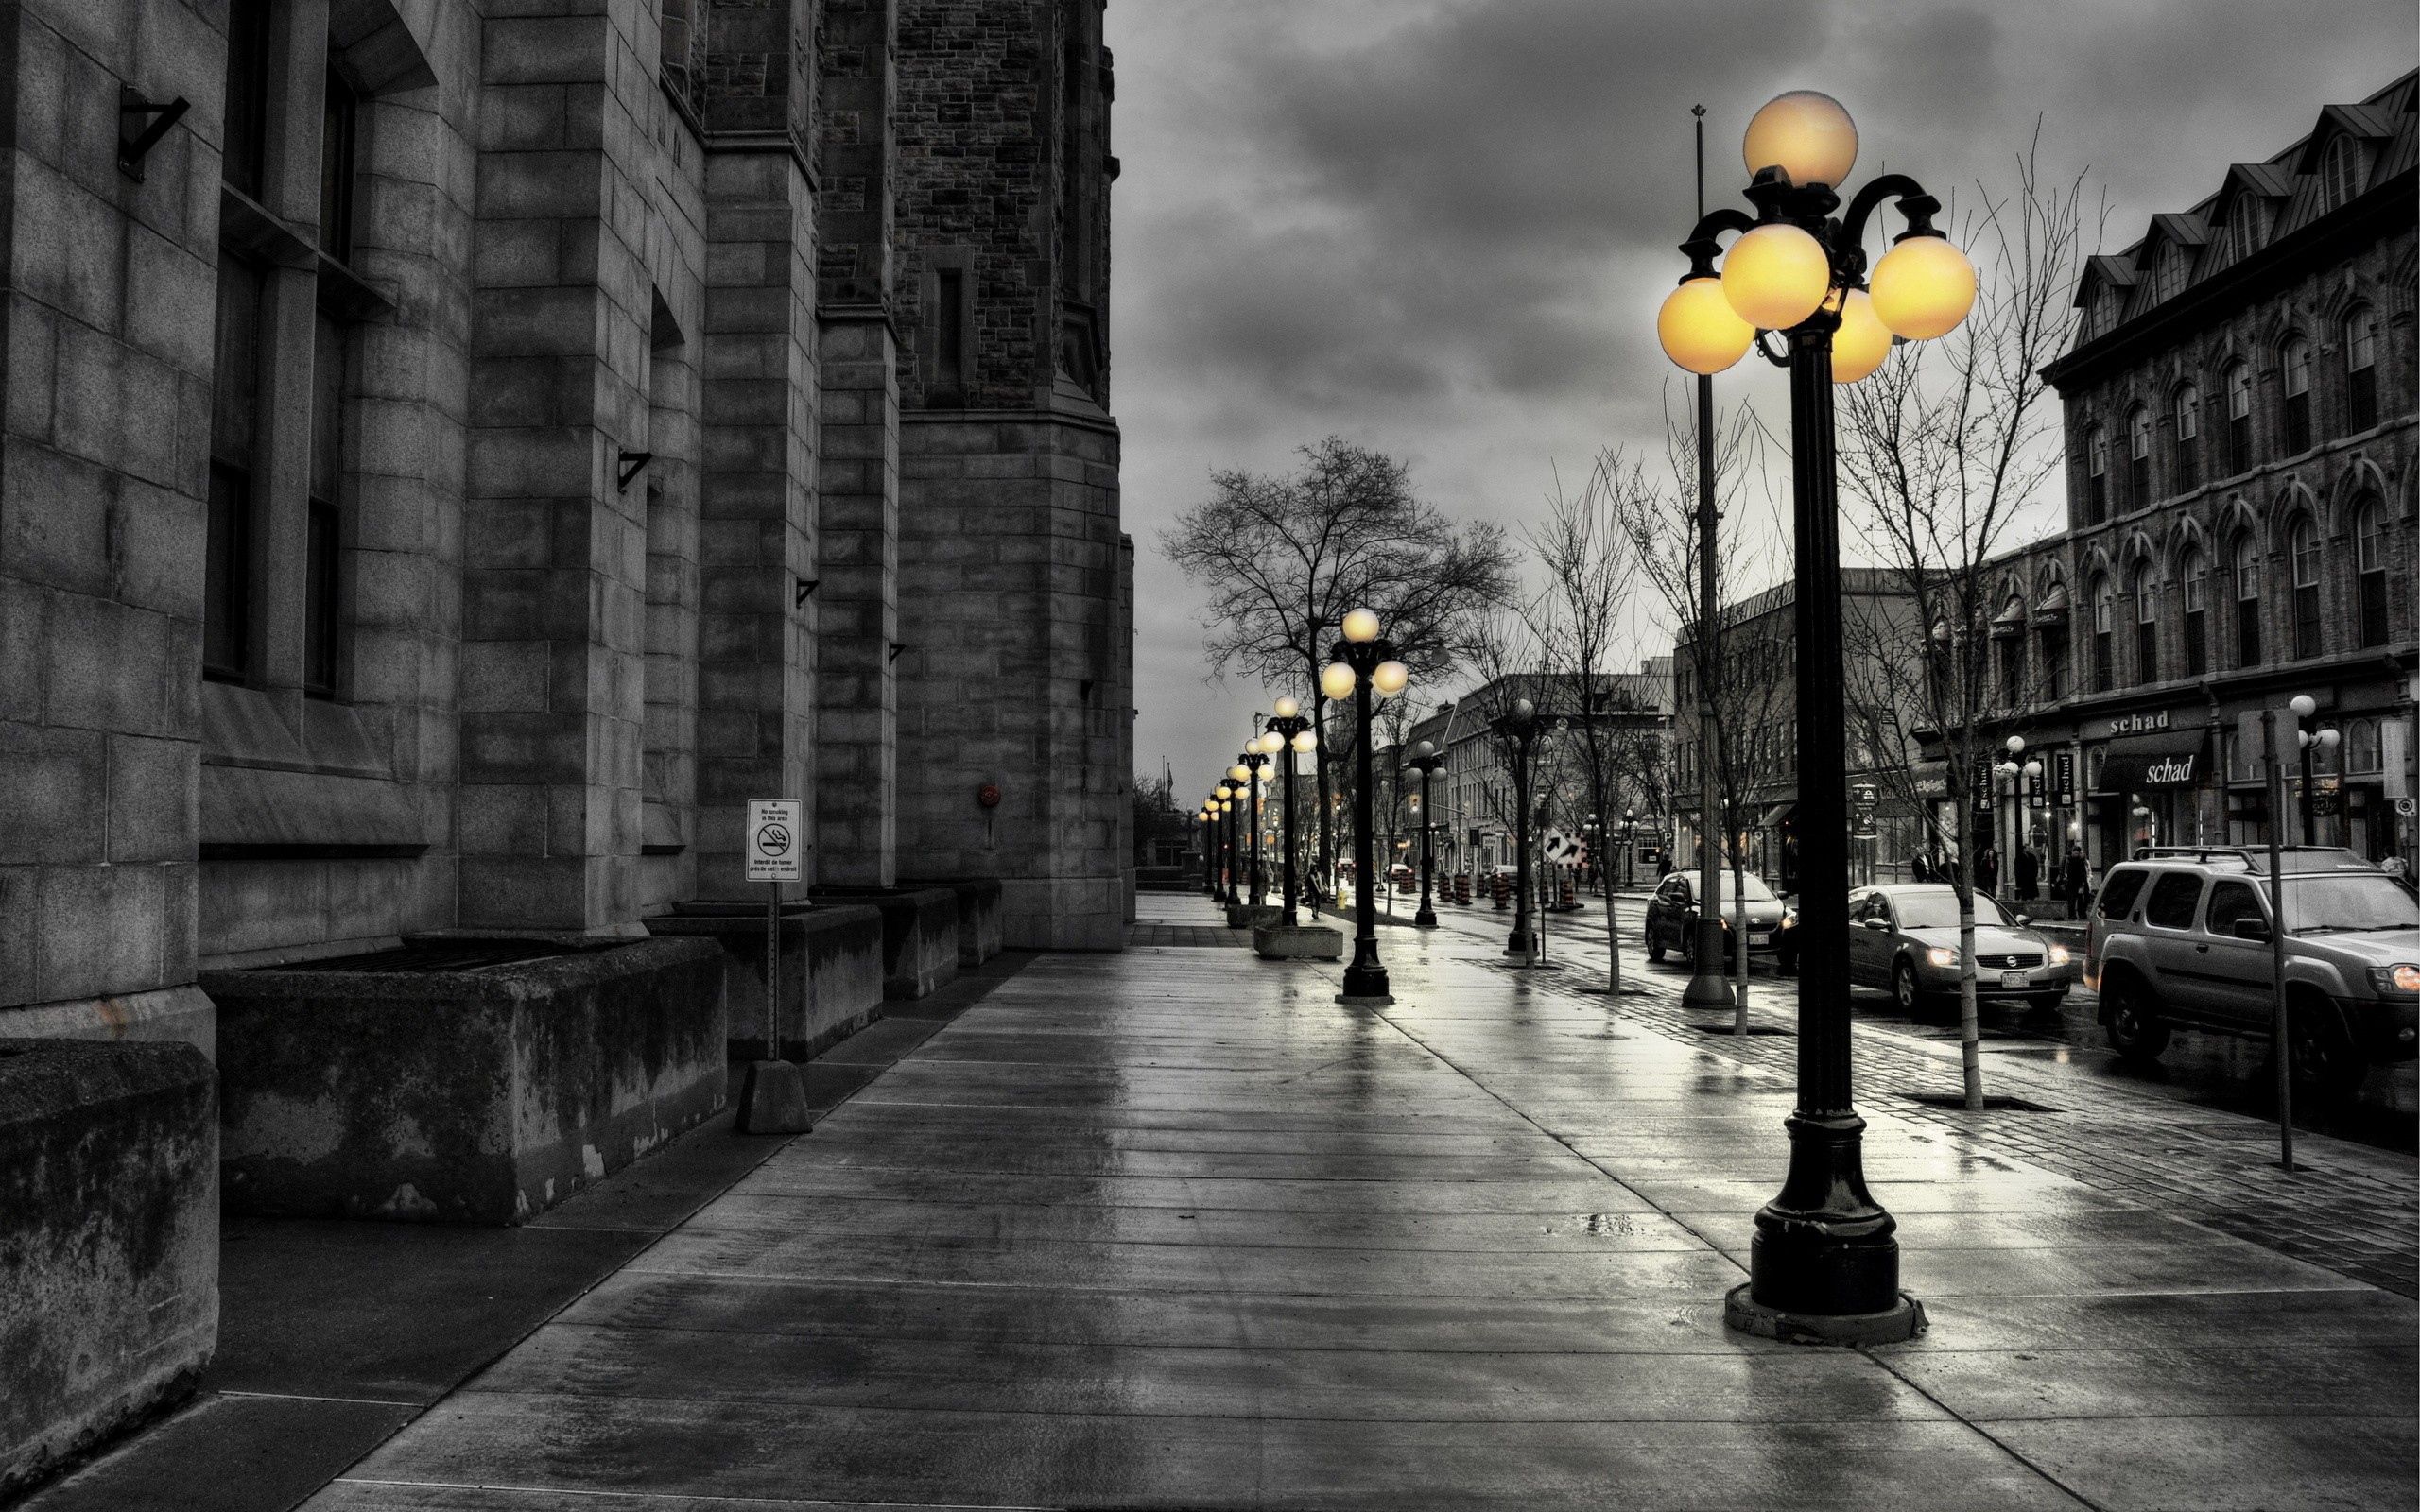 97745 download wallpaper cities, city, building, lights, lanterns, evening, bw, chb, hdr, street screensavers and pictures for free